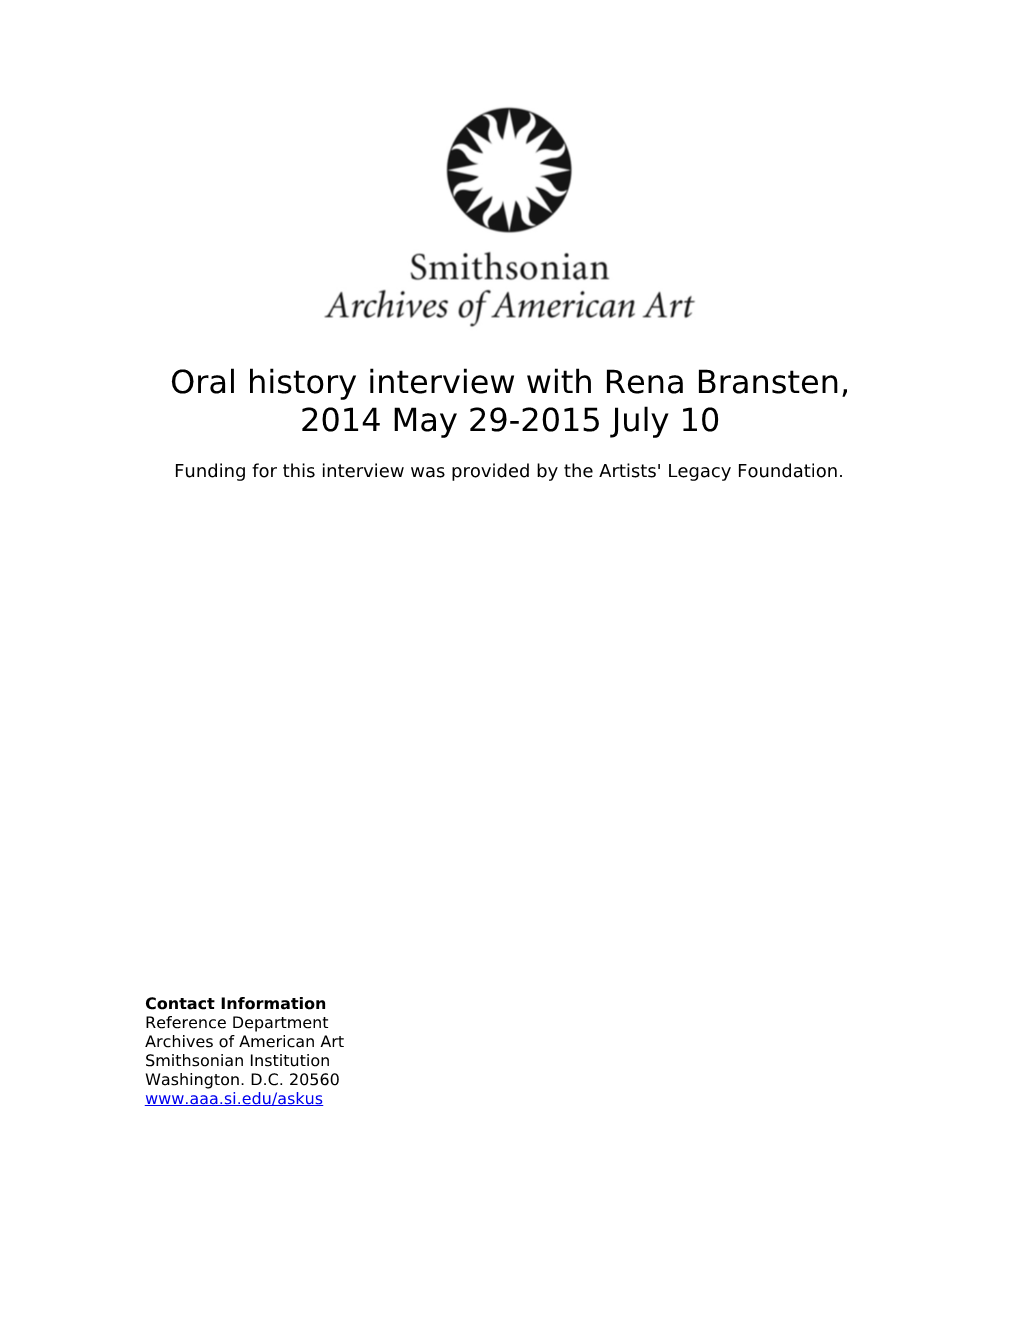 Oral History Interview with Rena Bransten, 2014 May 29-2015 July 10